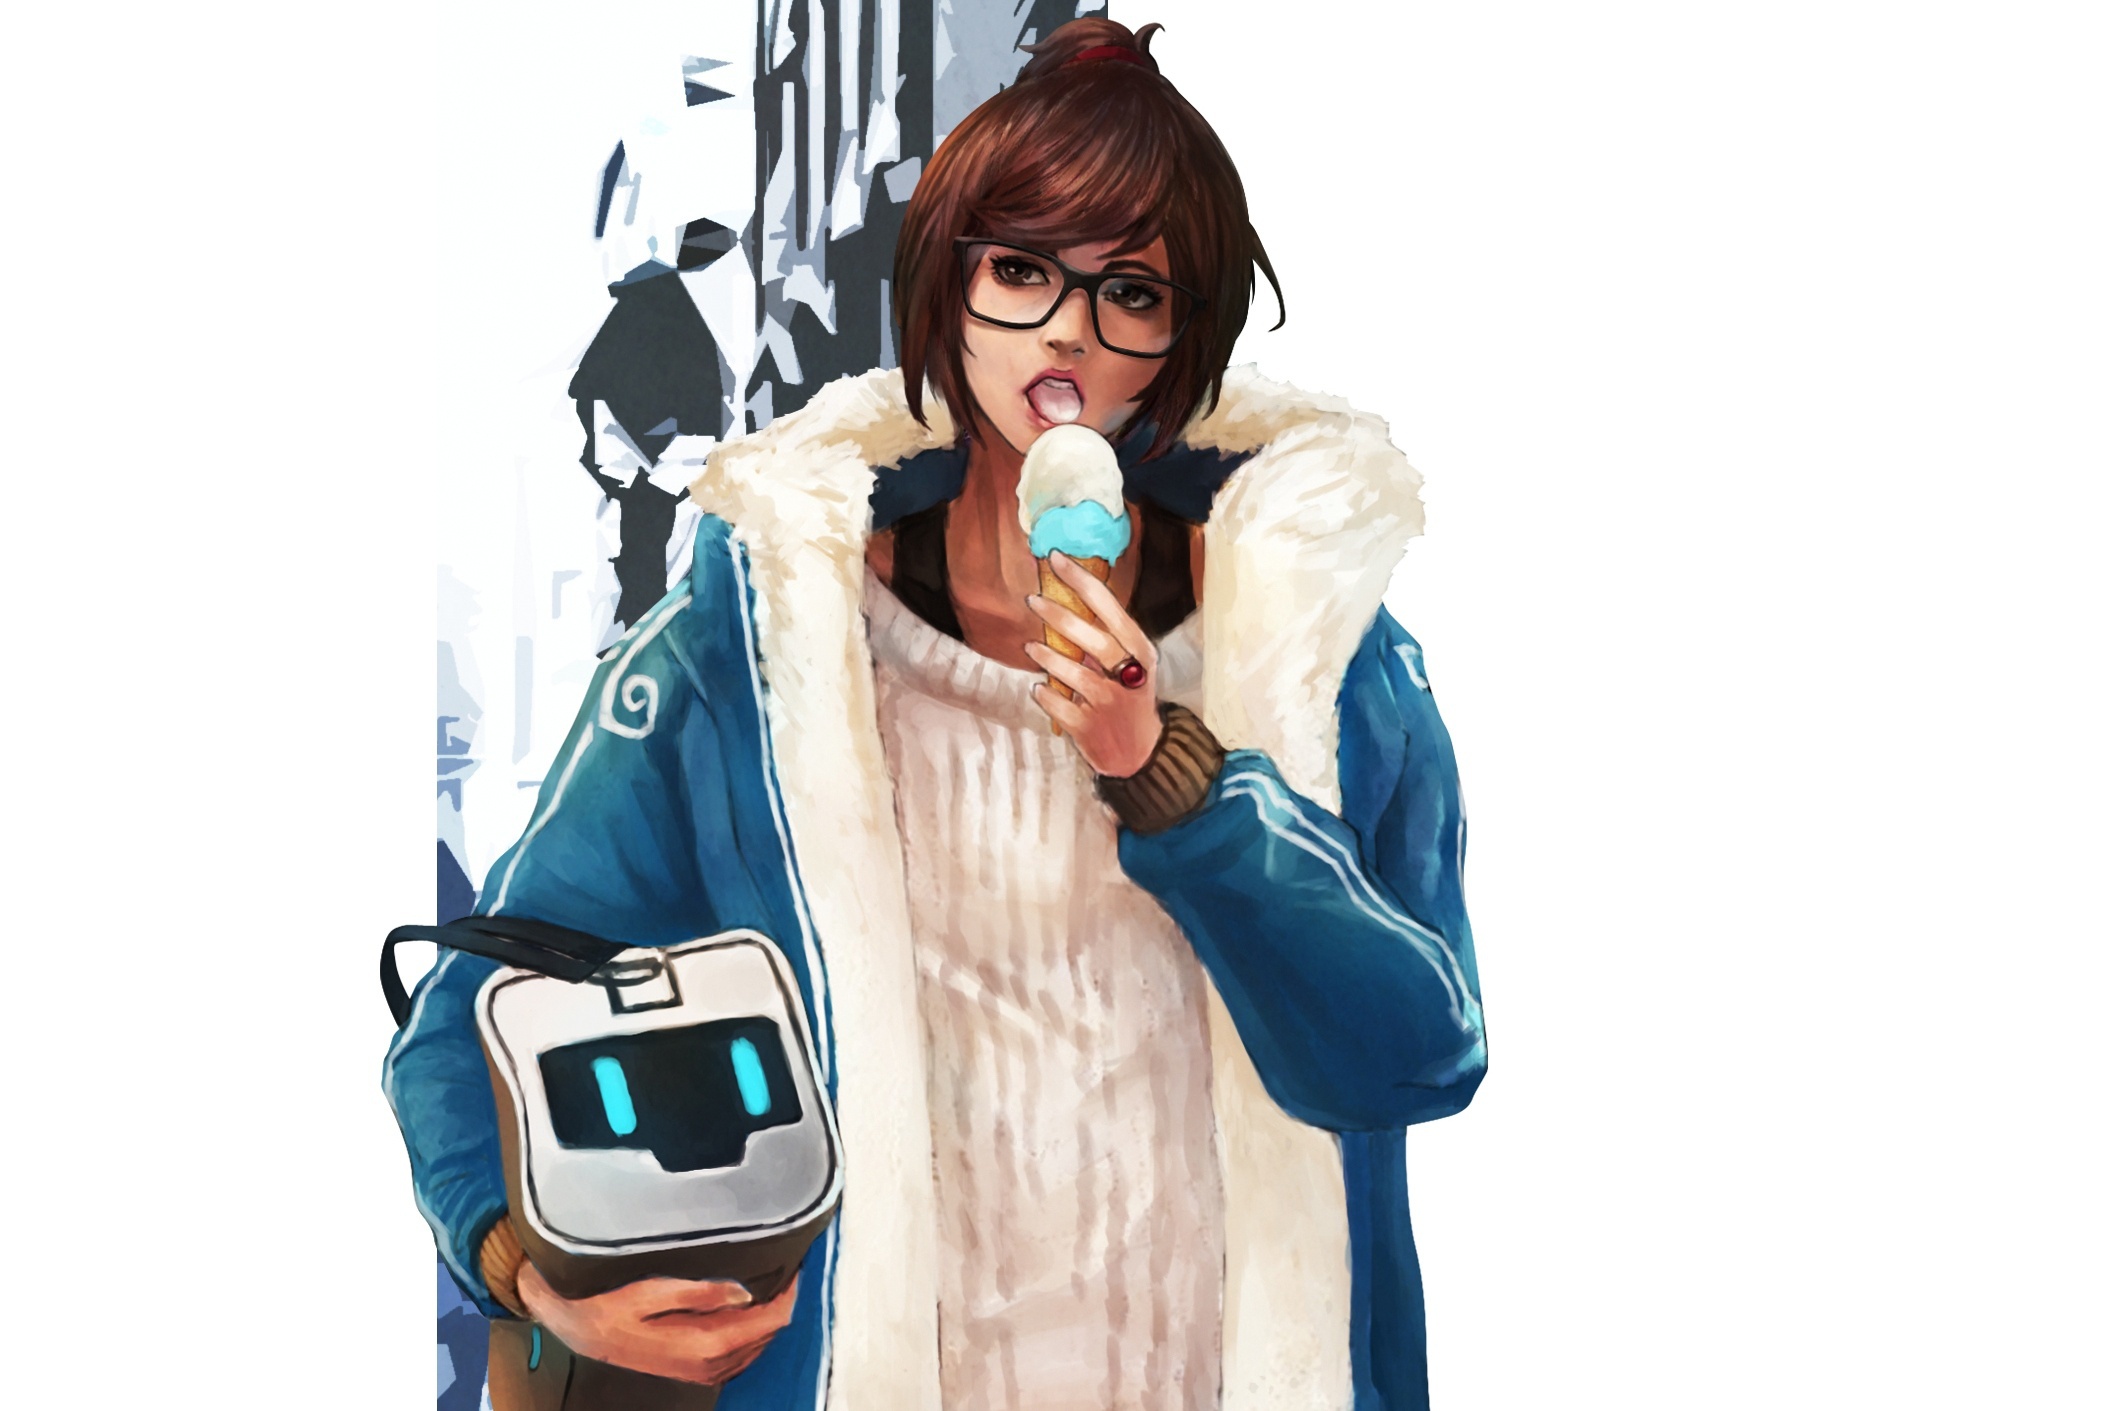 Mei (Overwatch), Glasses and ice cream, Mei Ling Zhou, Winter collection, 2110x1420 HD Desktop